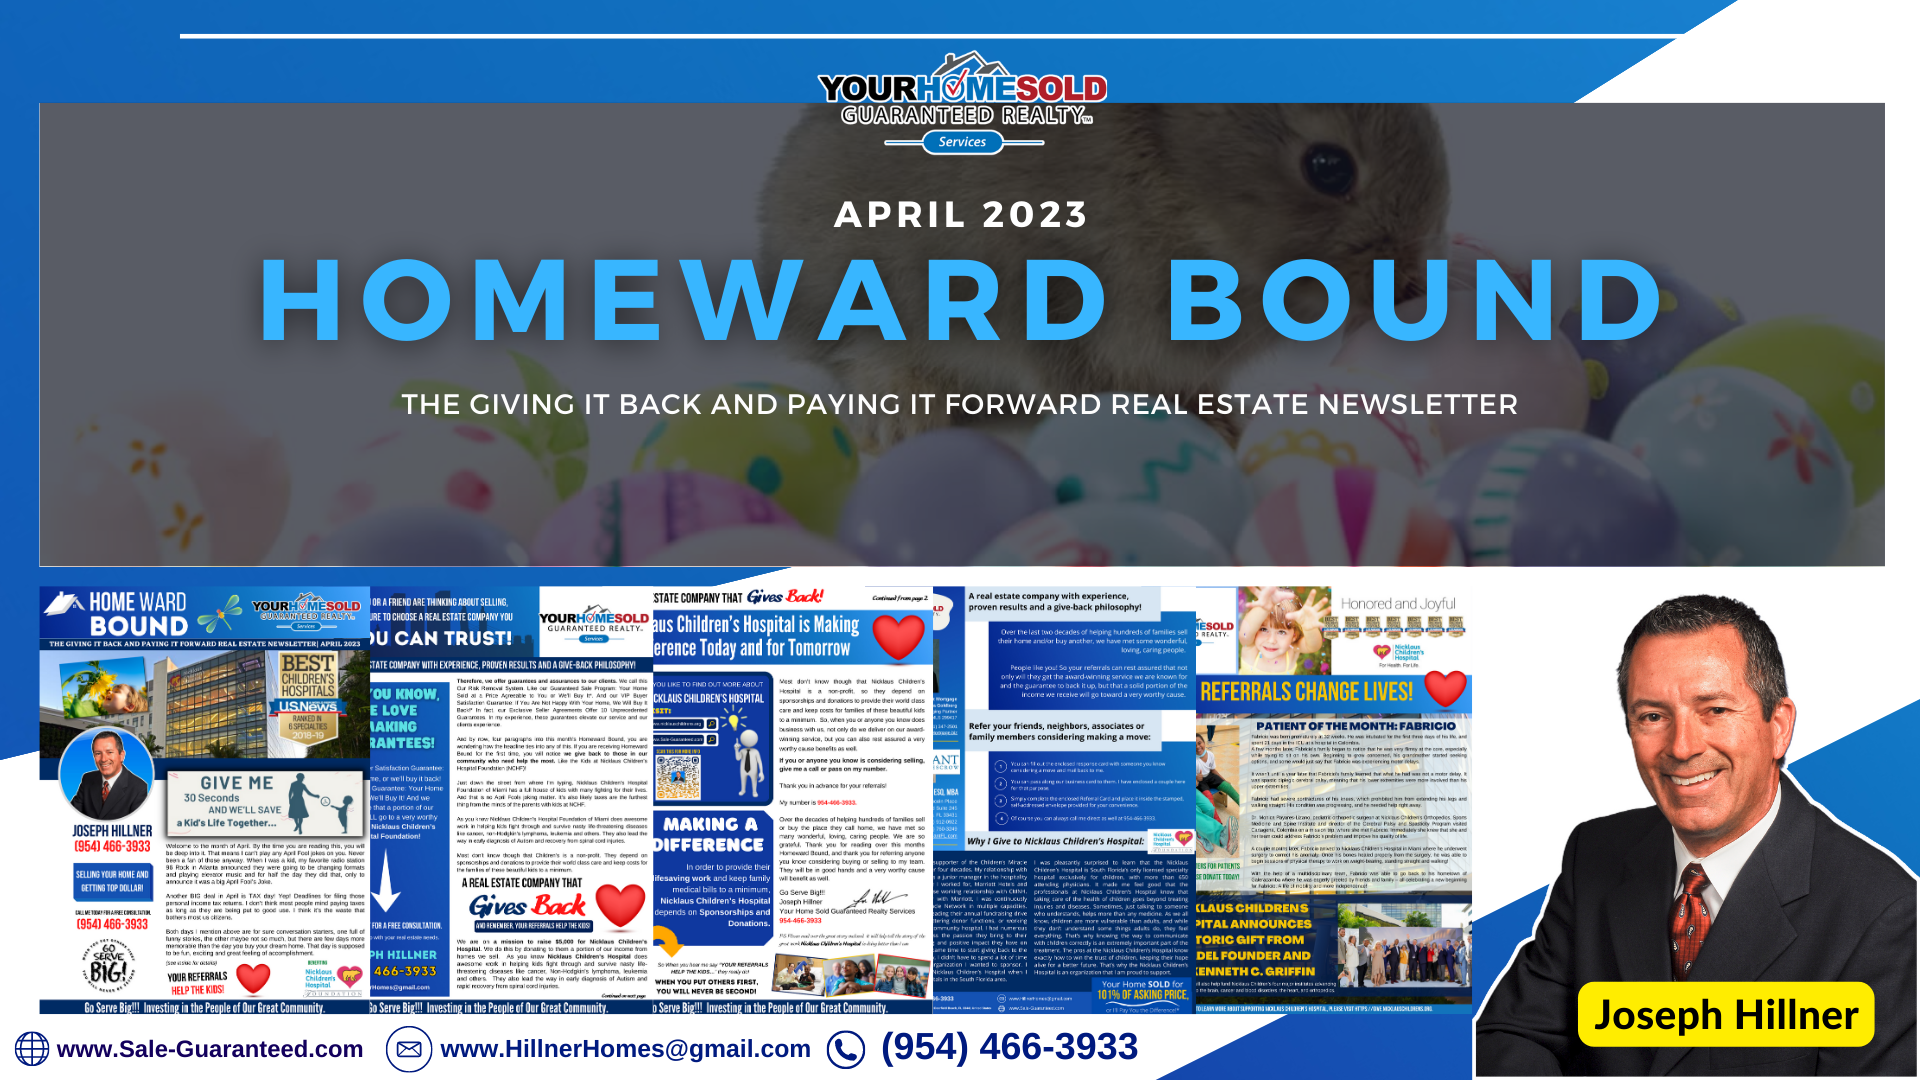 Give Me 30 Seconds and We’ll Save a Kids Life Together… | April 2023 Homeward Bound Newsletter